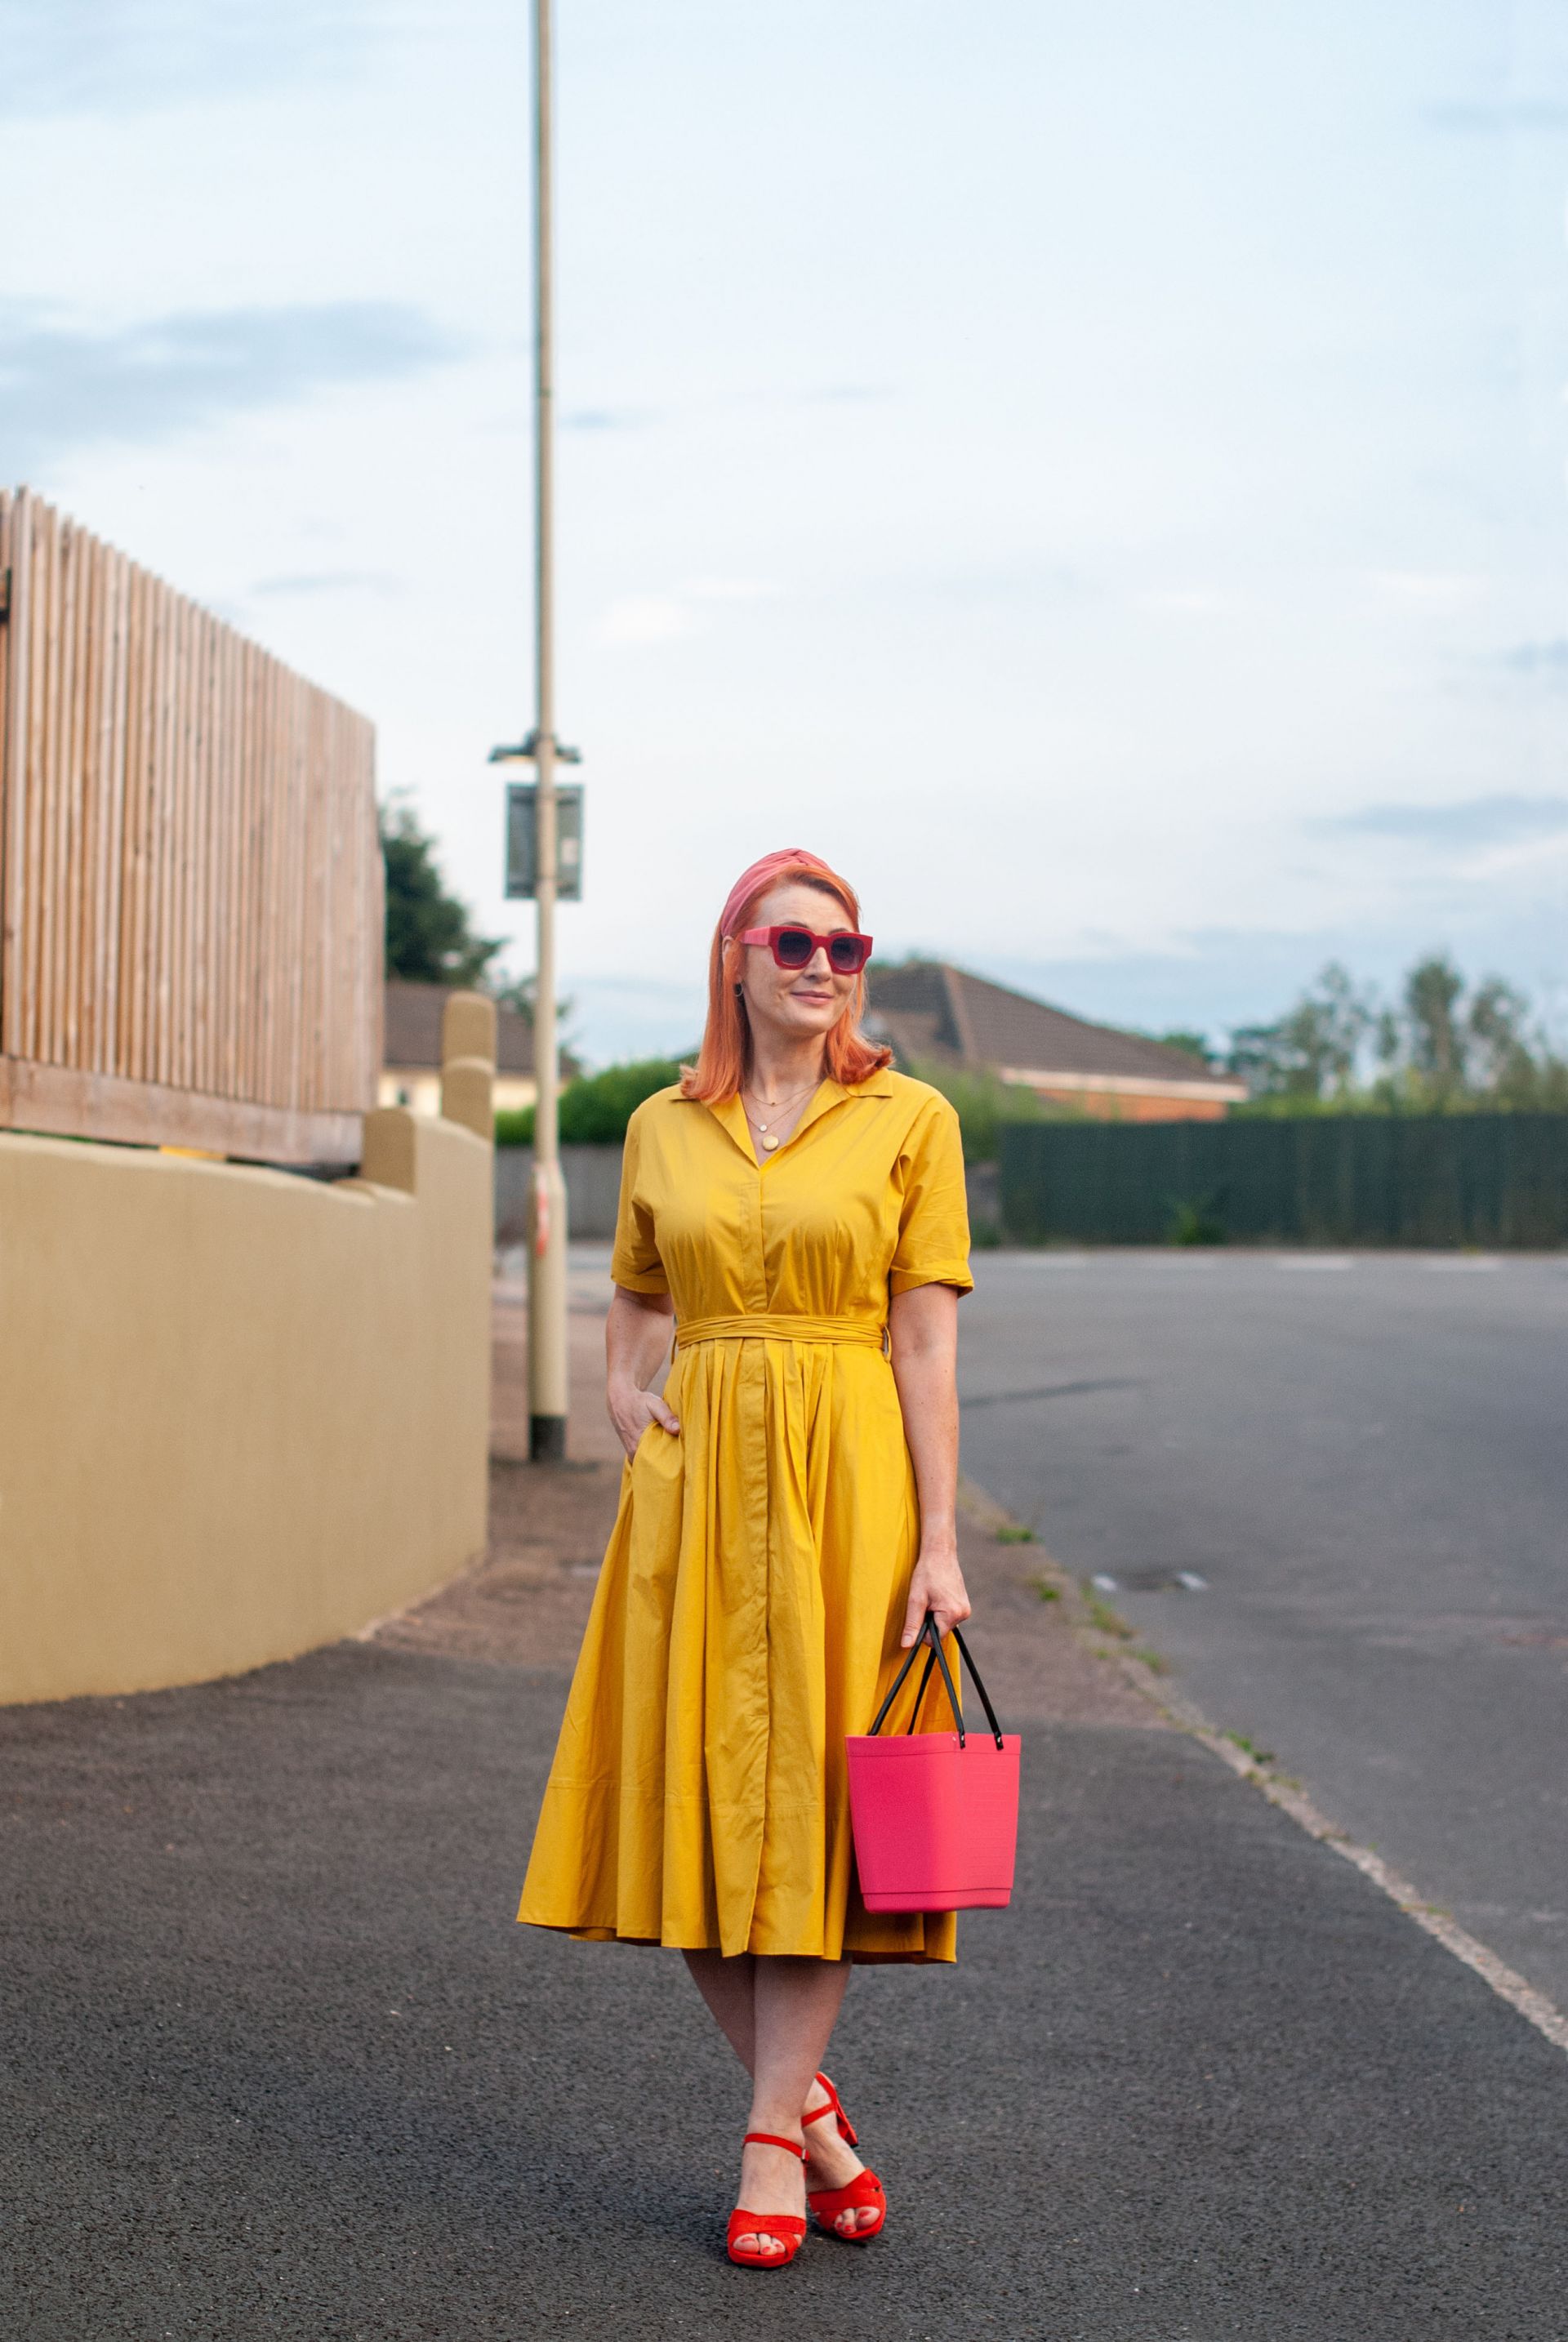 Classic Yellow Summer Dress Styled With Red and Pink